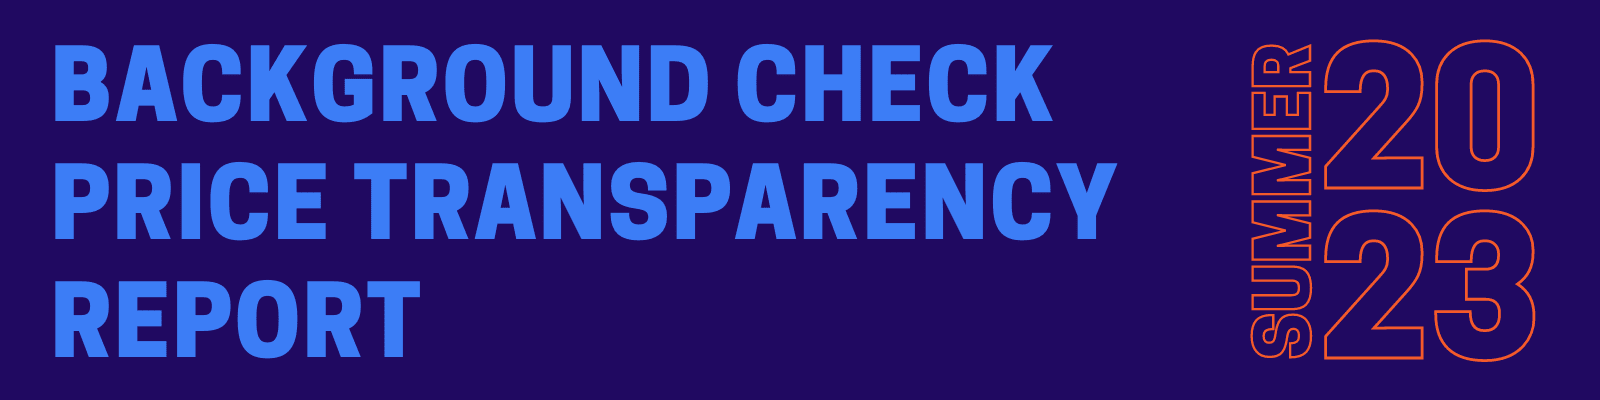 Background check price transparency report banner